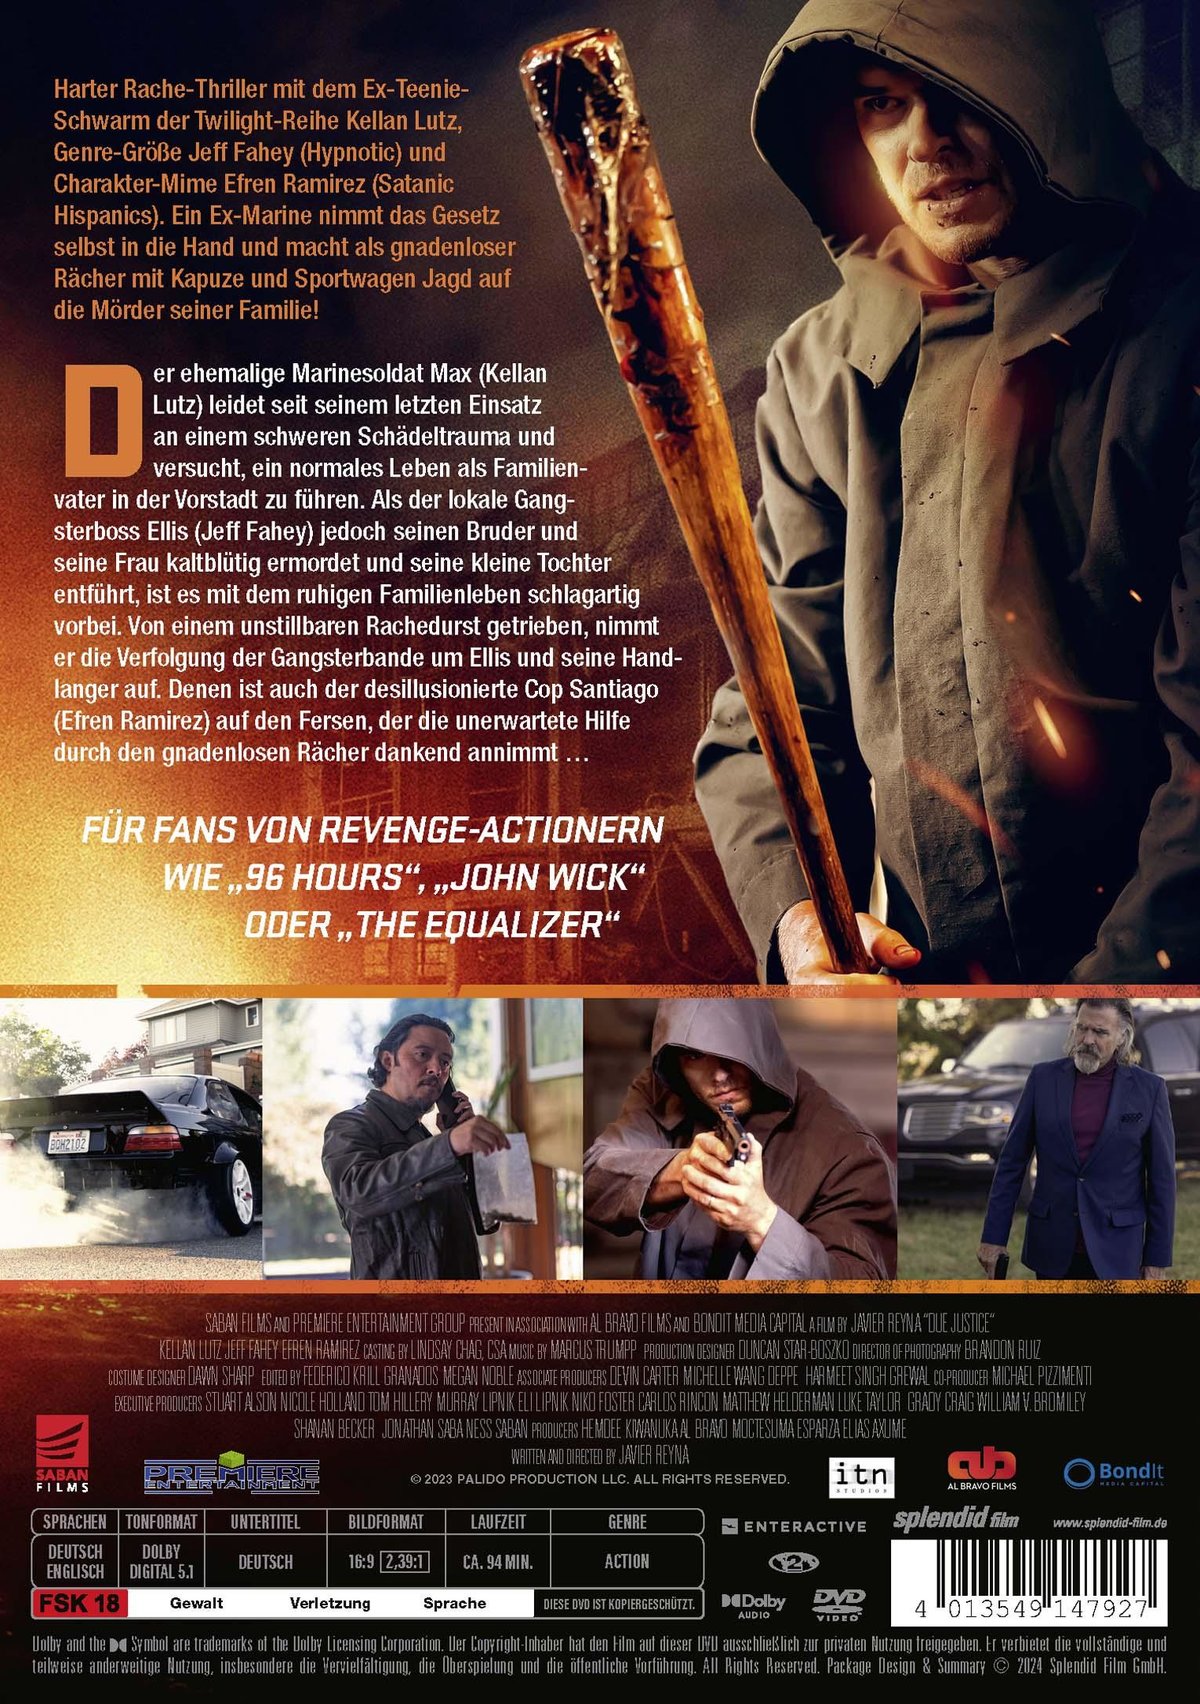 Palido – Revenge will find you  (DVD)